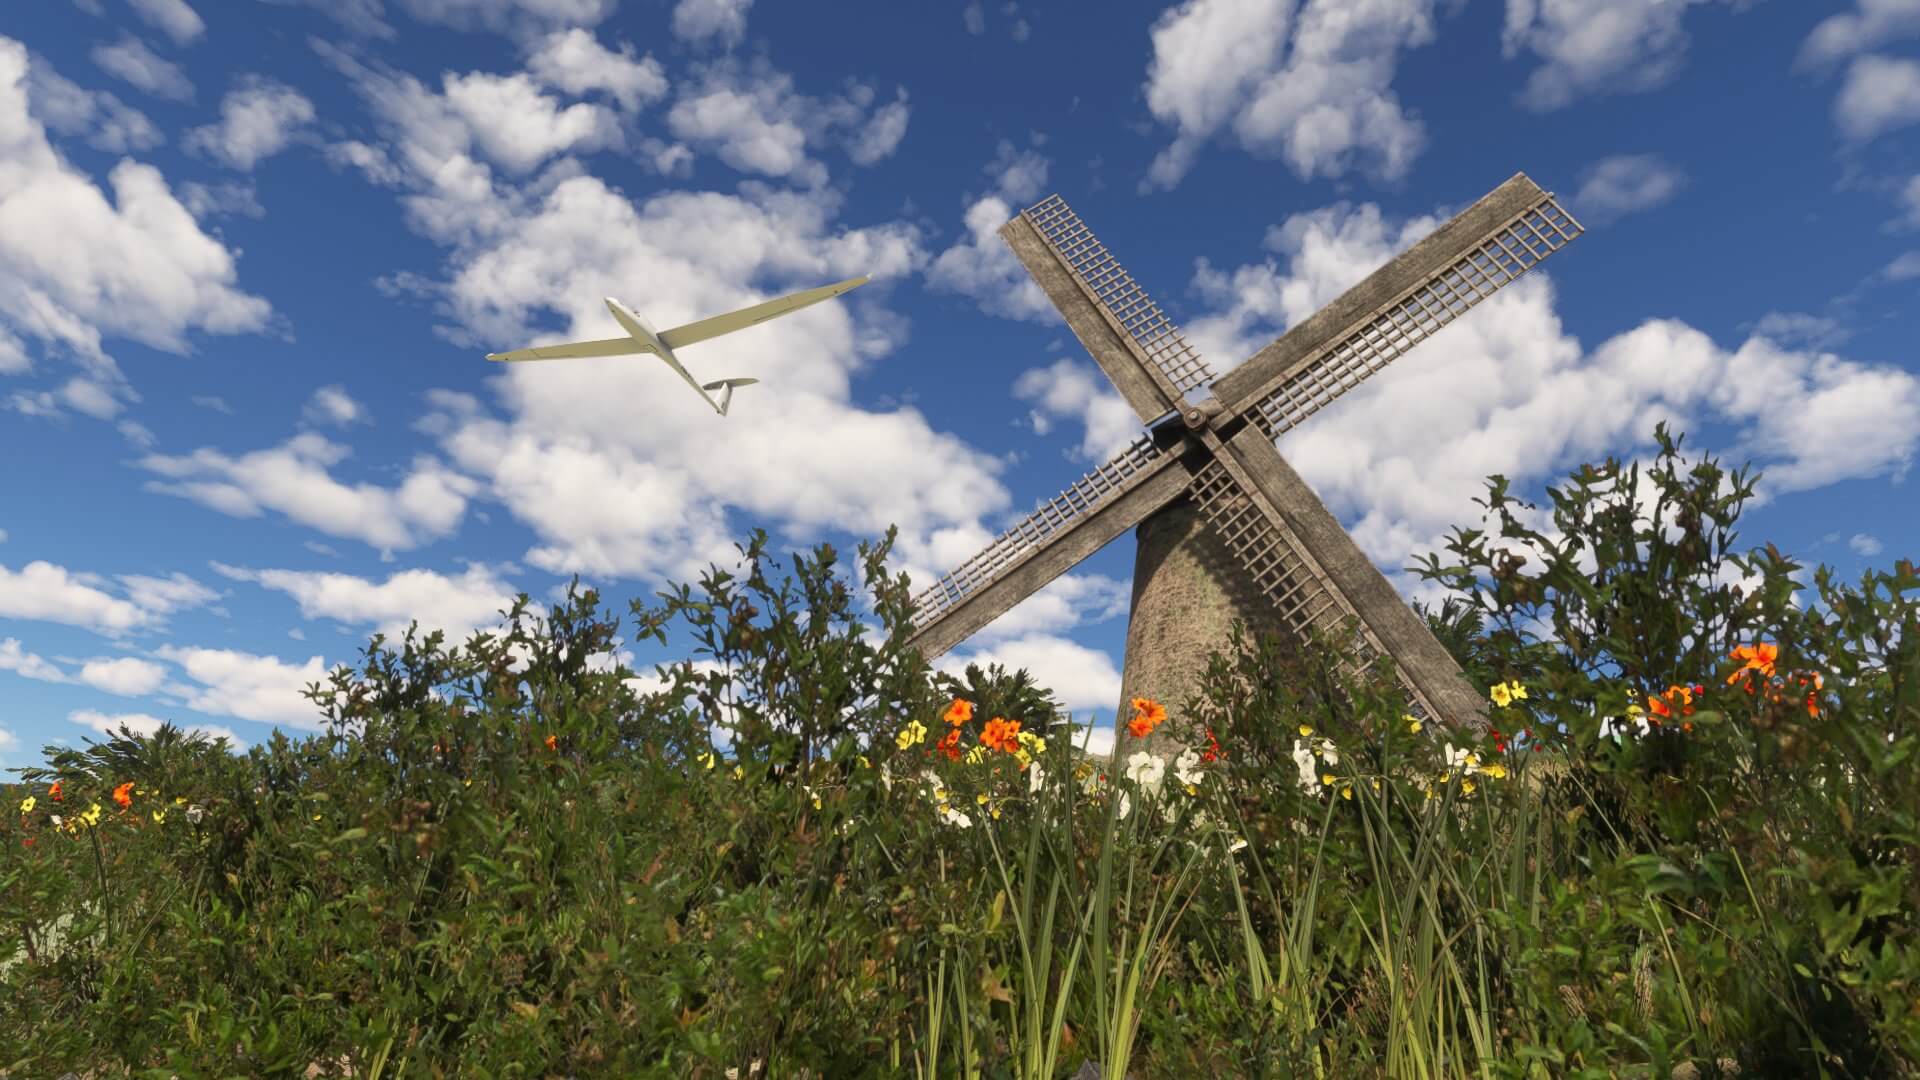 A glider passes above a windmill with flowers blooming in front.